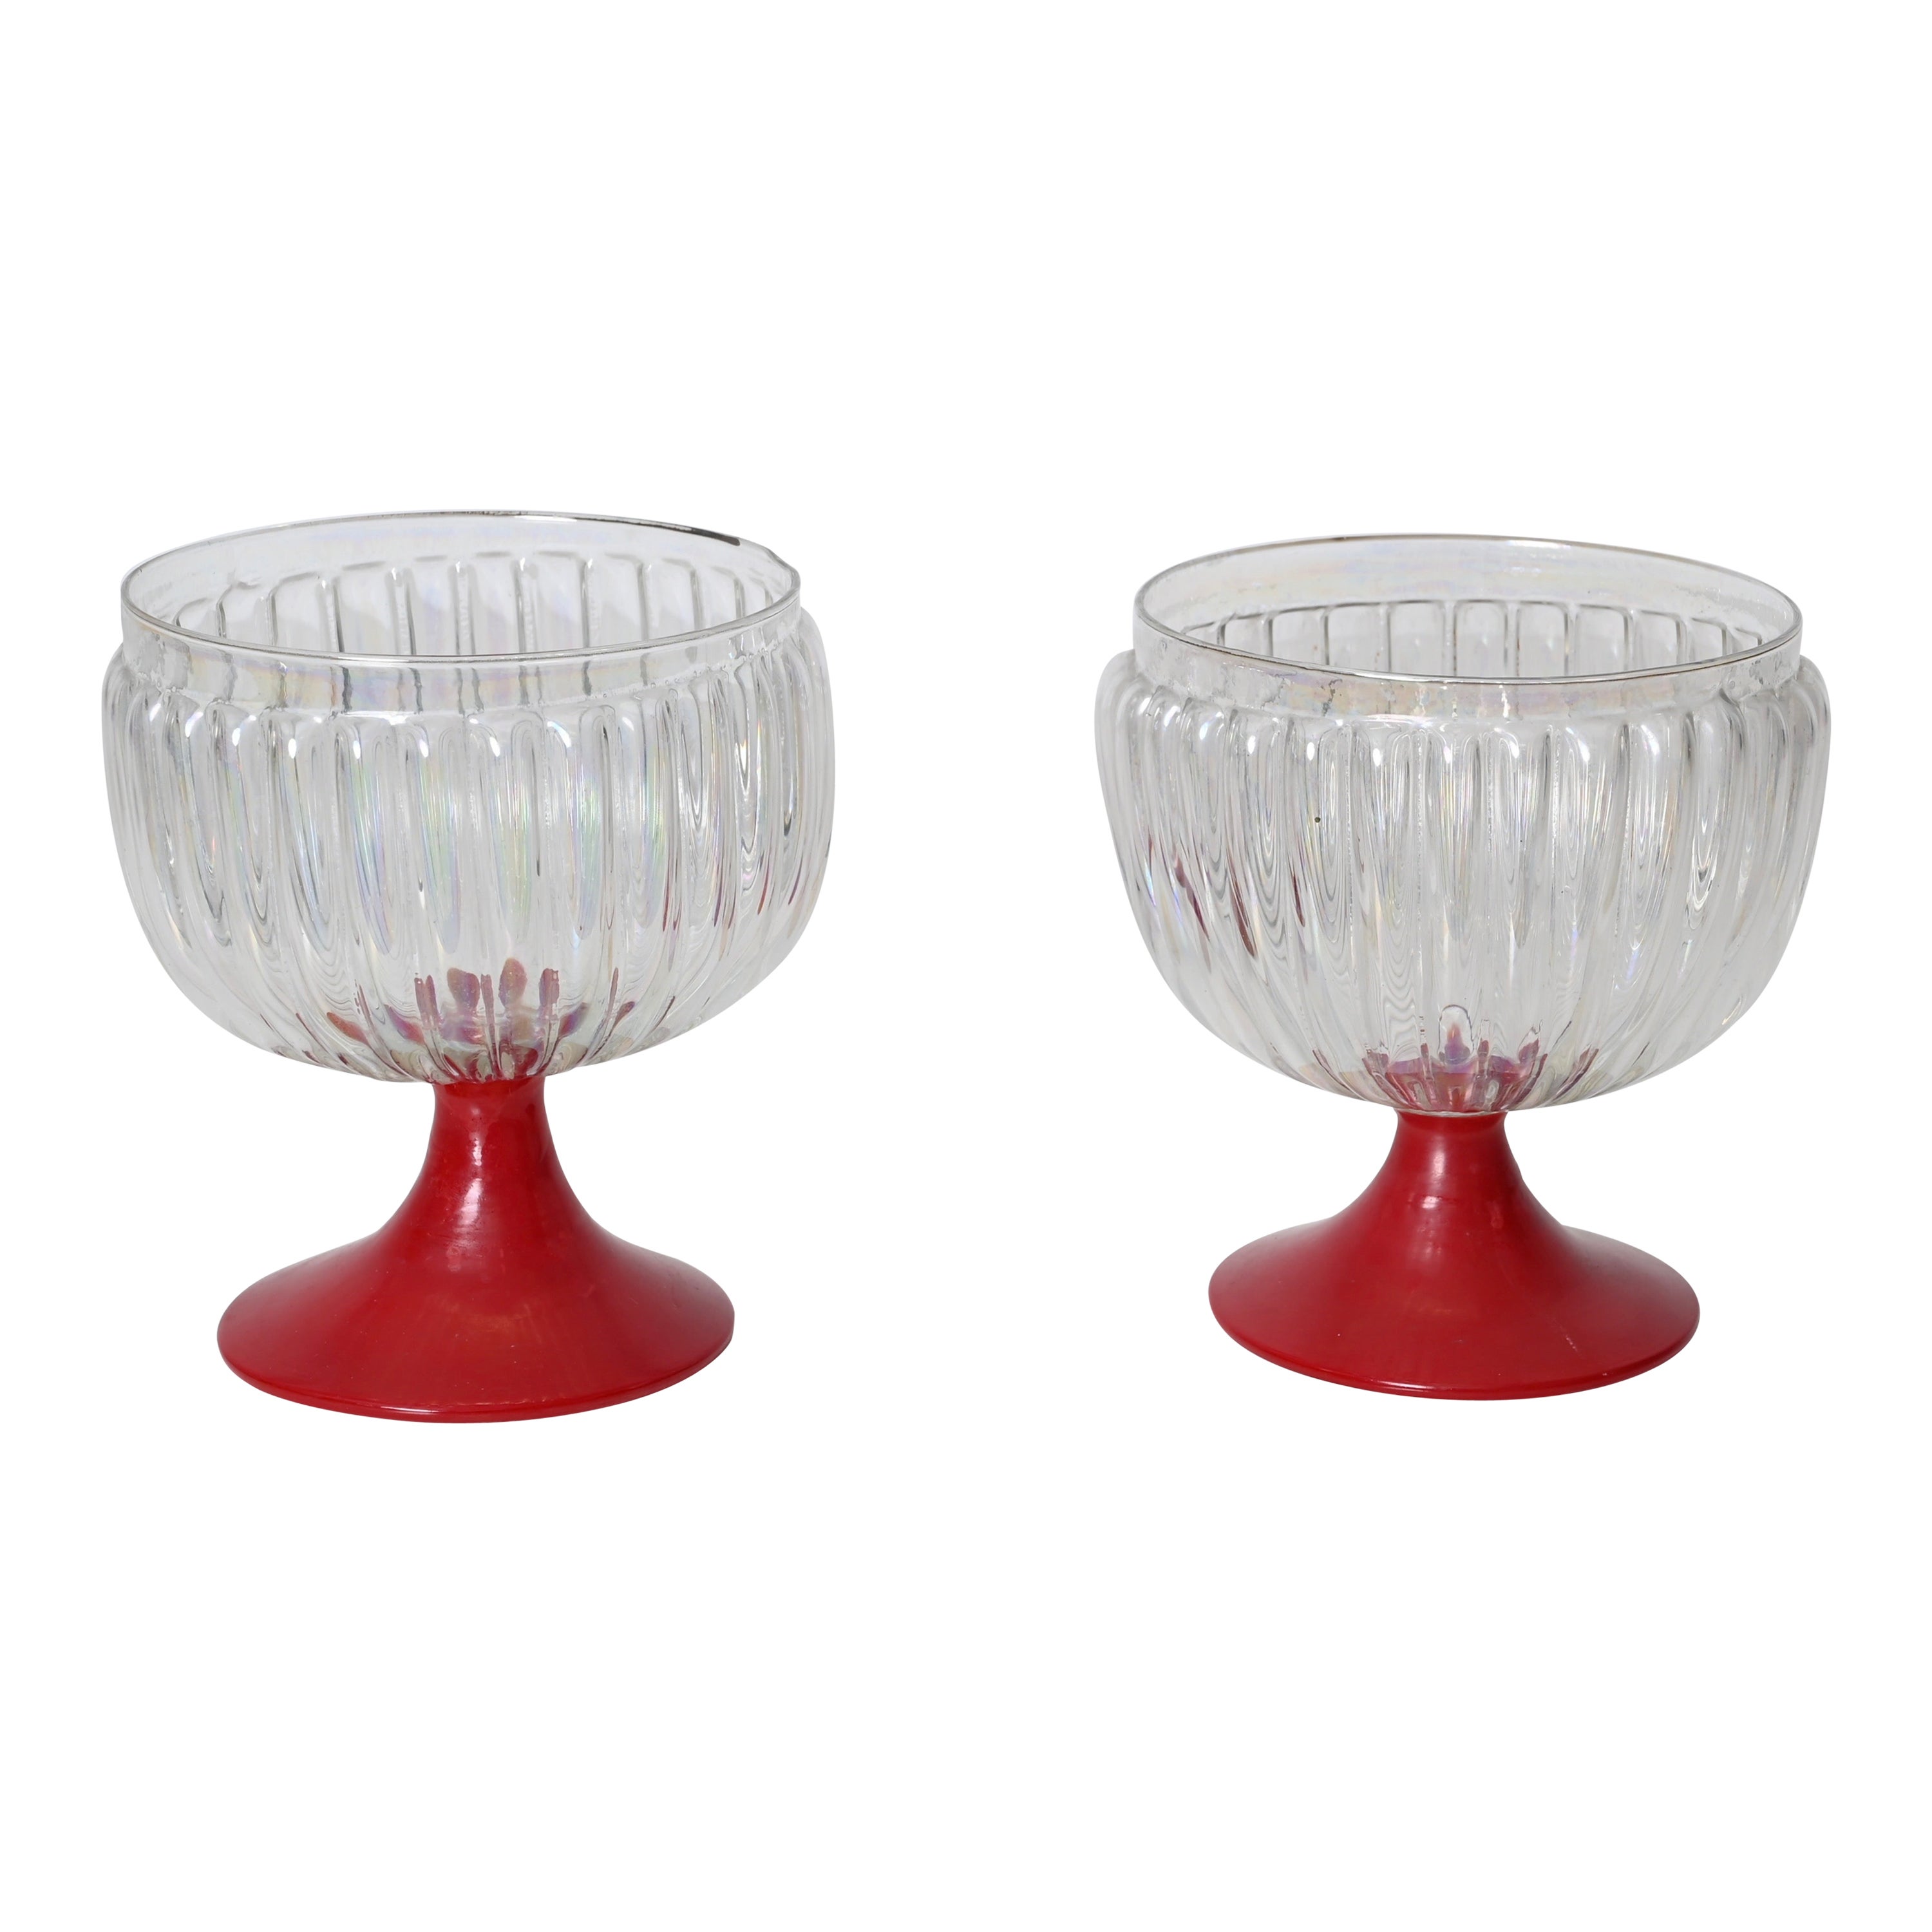 Pair of Large Decorative Murano Red and Iridescent Goblet Glasses, Italy 1940s For Sale